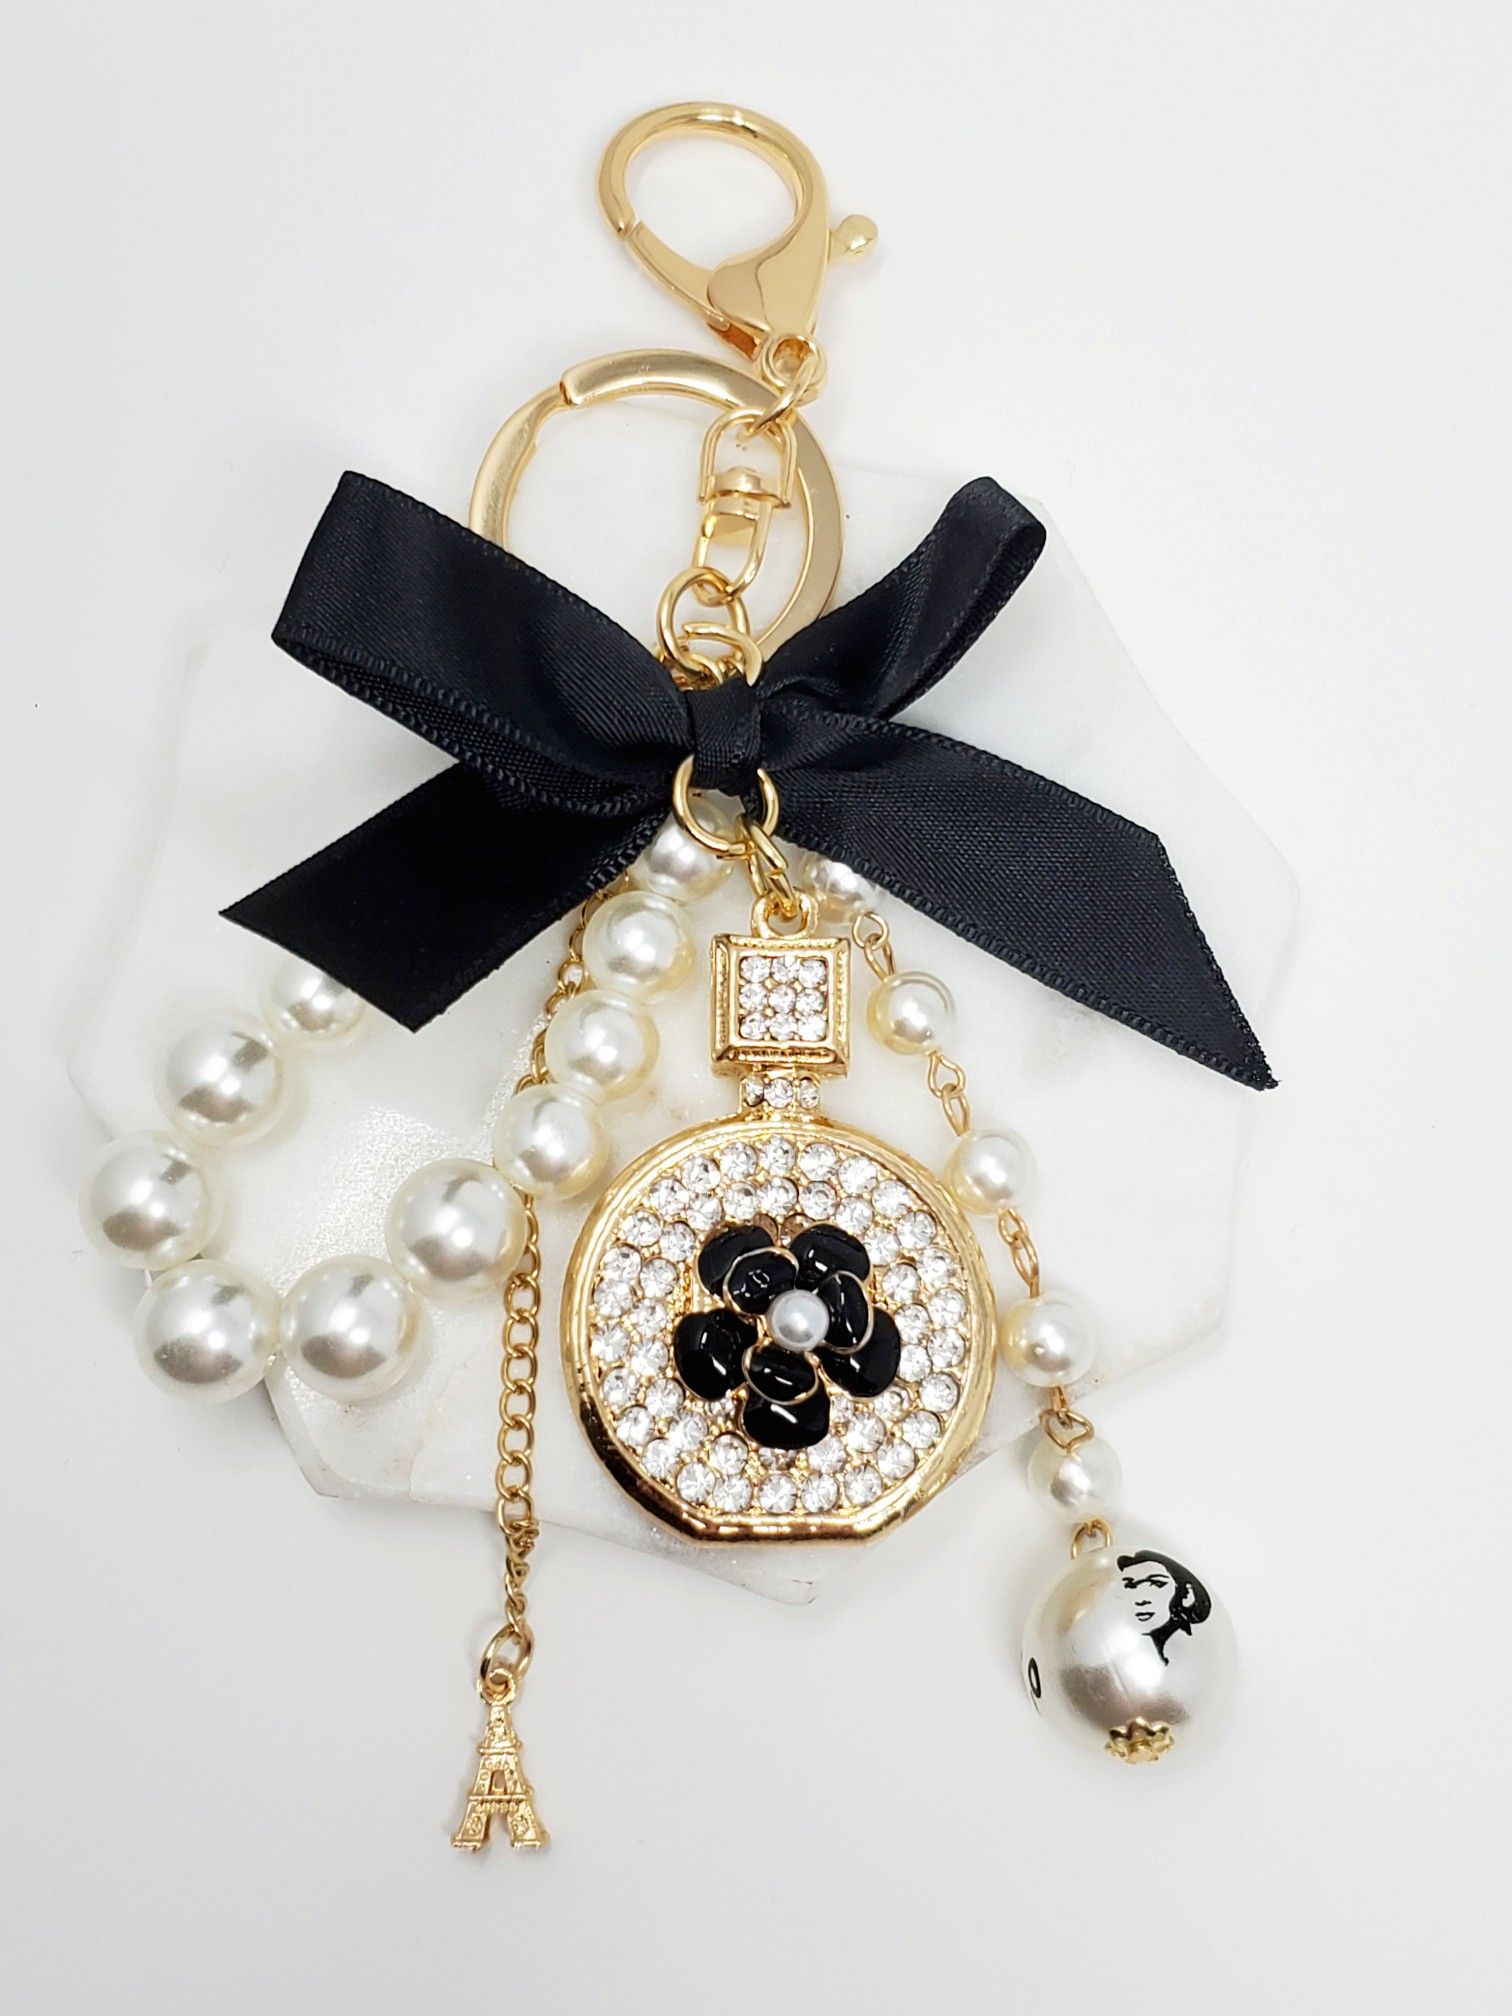 Bling keychain bagcharm with bow and pearls